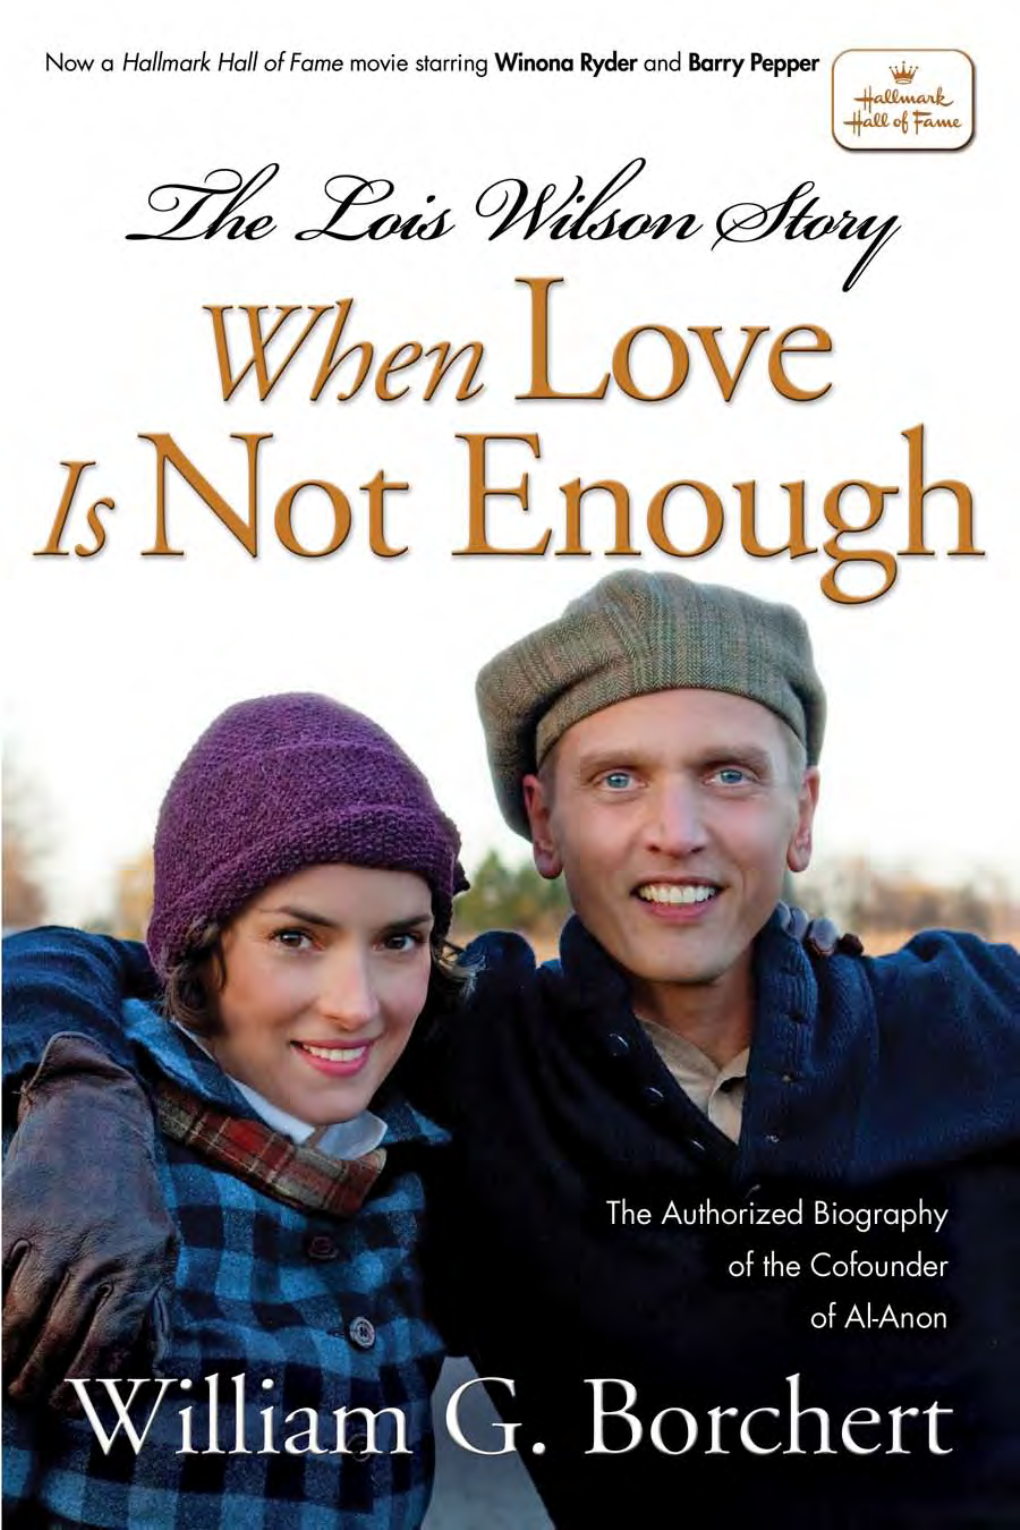 The Lois Wilson Story: When Love Is Not Enough / William G